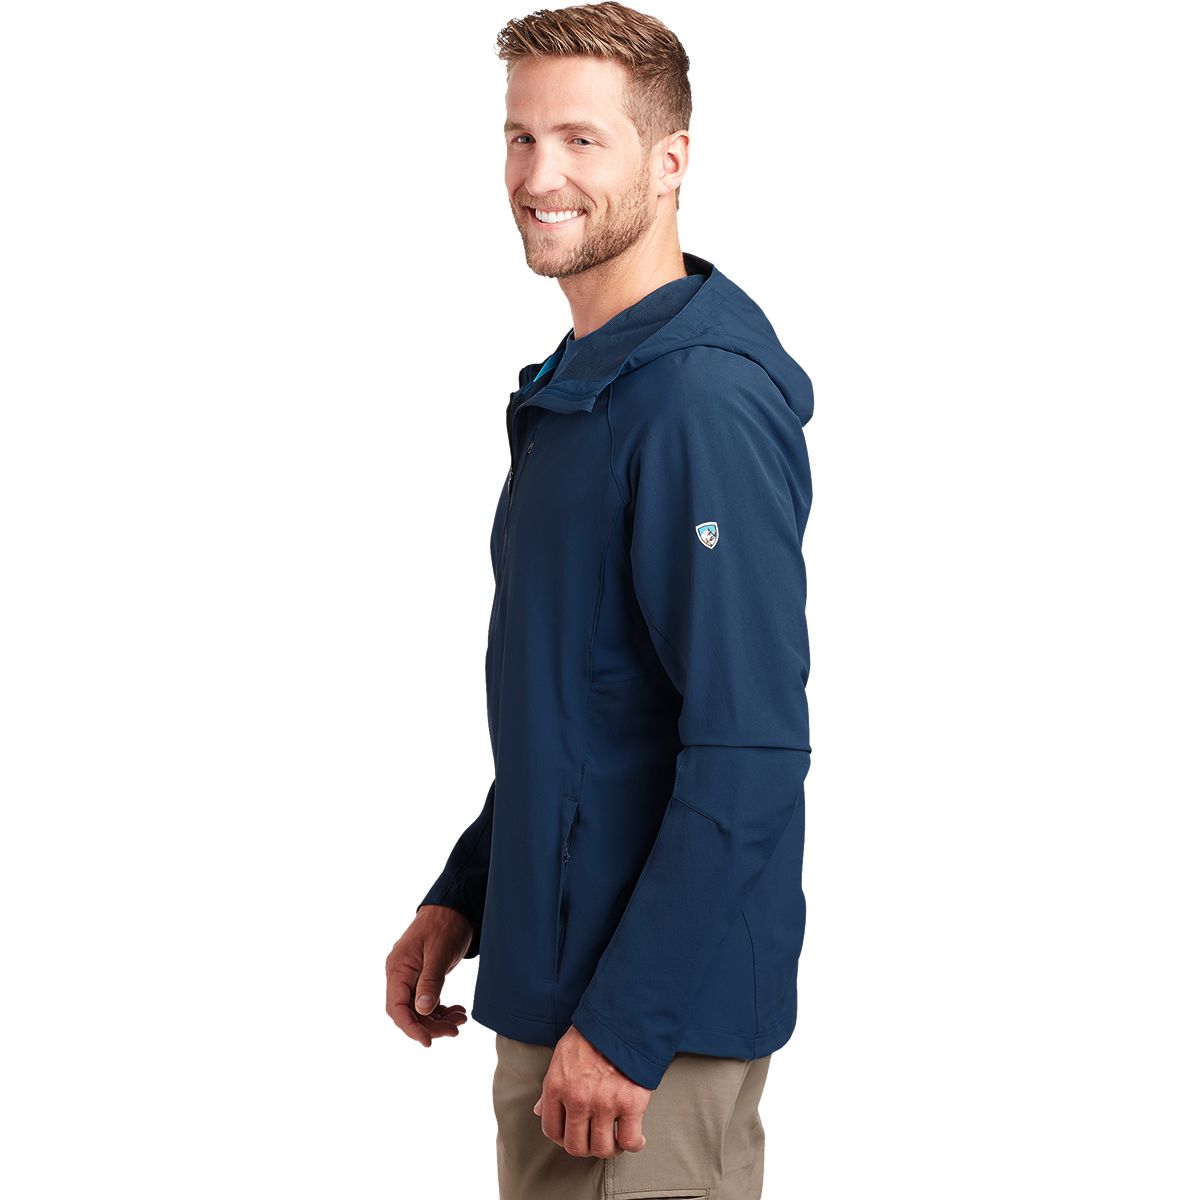 For those KÜHL summer evenings, look no further than the TRANSCENDR® Men's  softshell hoody. It's perfect for everyday (and night) lig